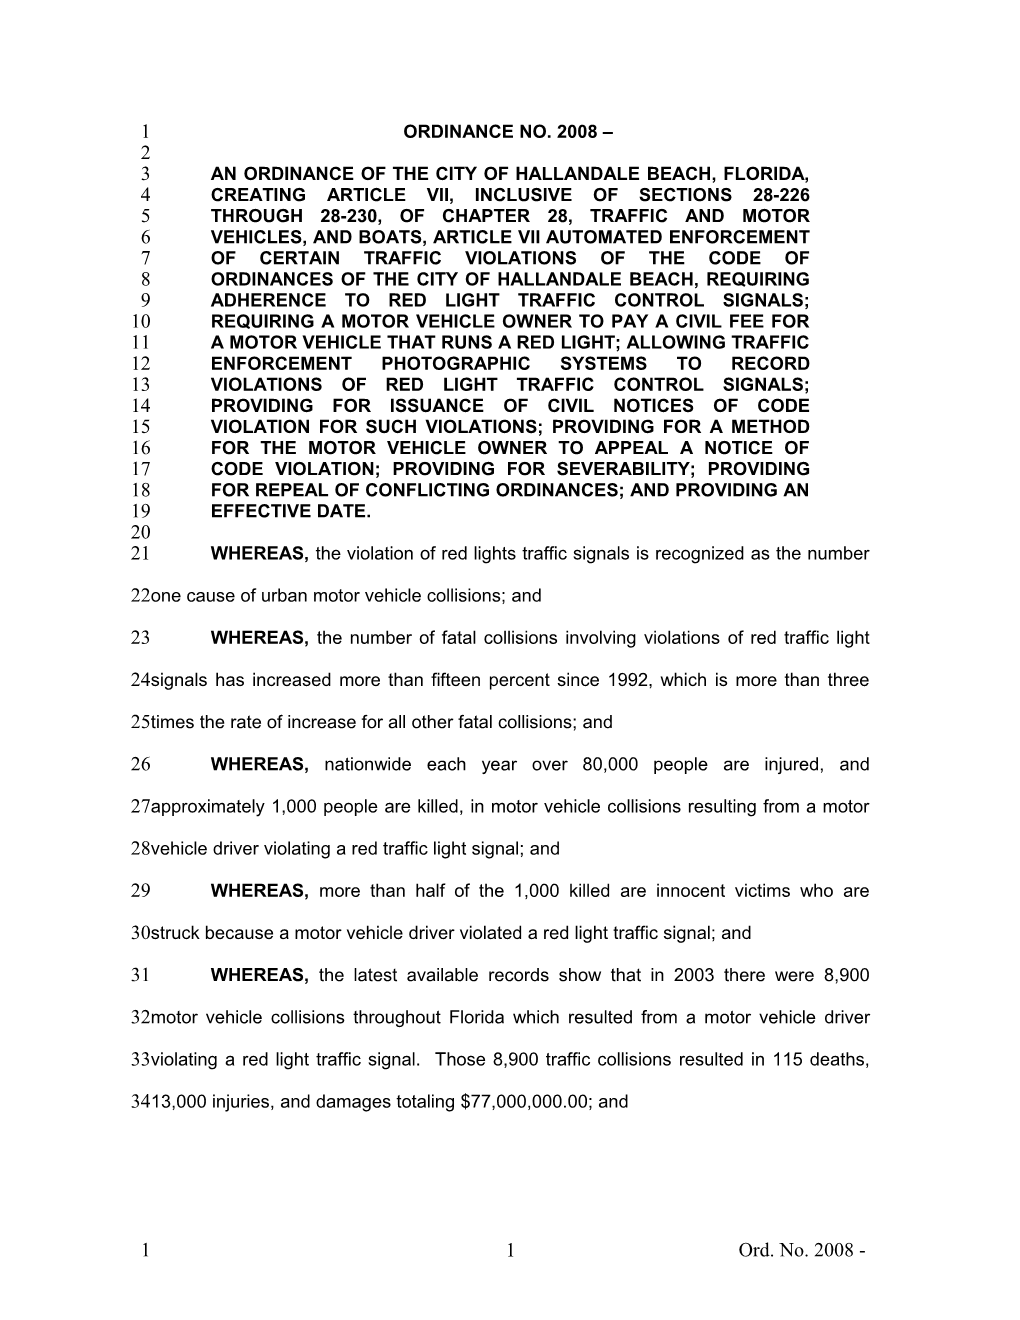 An Ordinance of the City of Hallandale Beach, Florida, Creating Article Vii, Inclusive